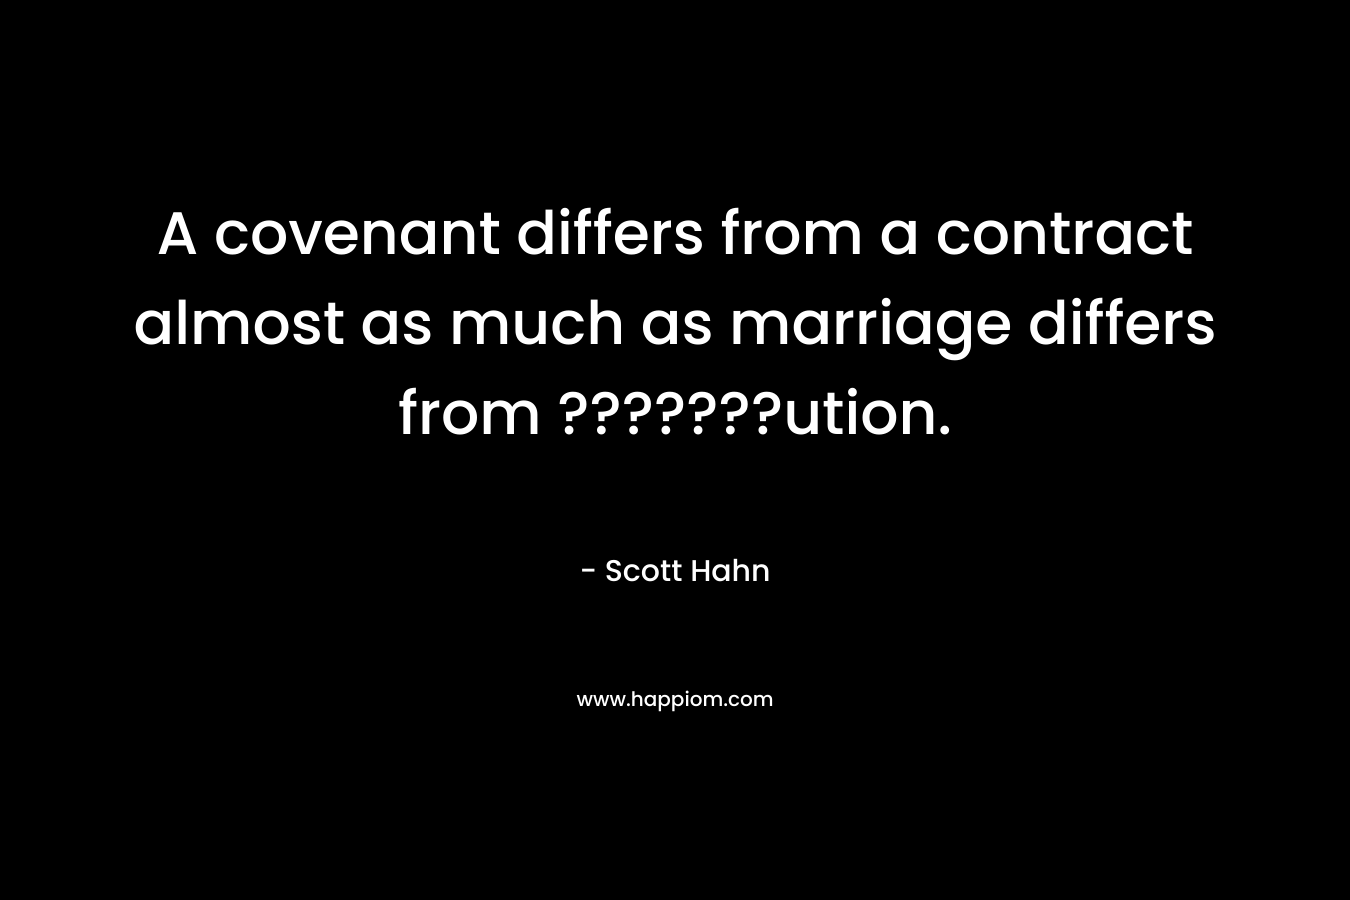 A covenant differs from a contract almost as much as marriage differs from ???????ution. – Scott Hahn